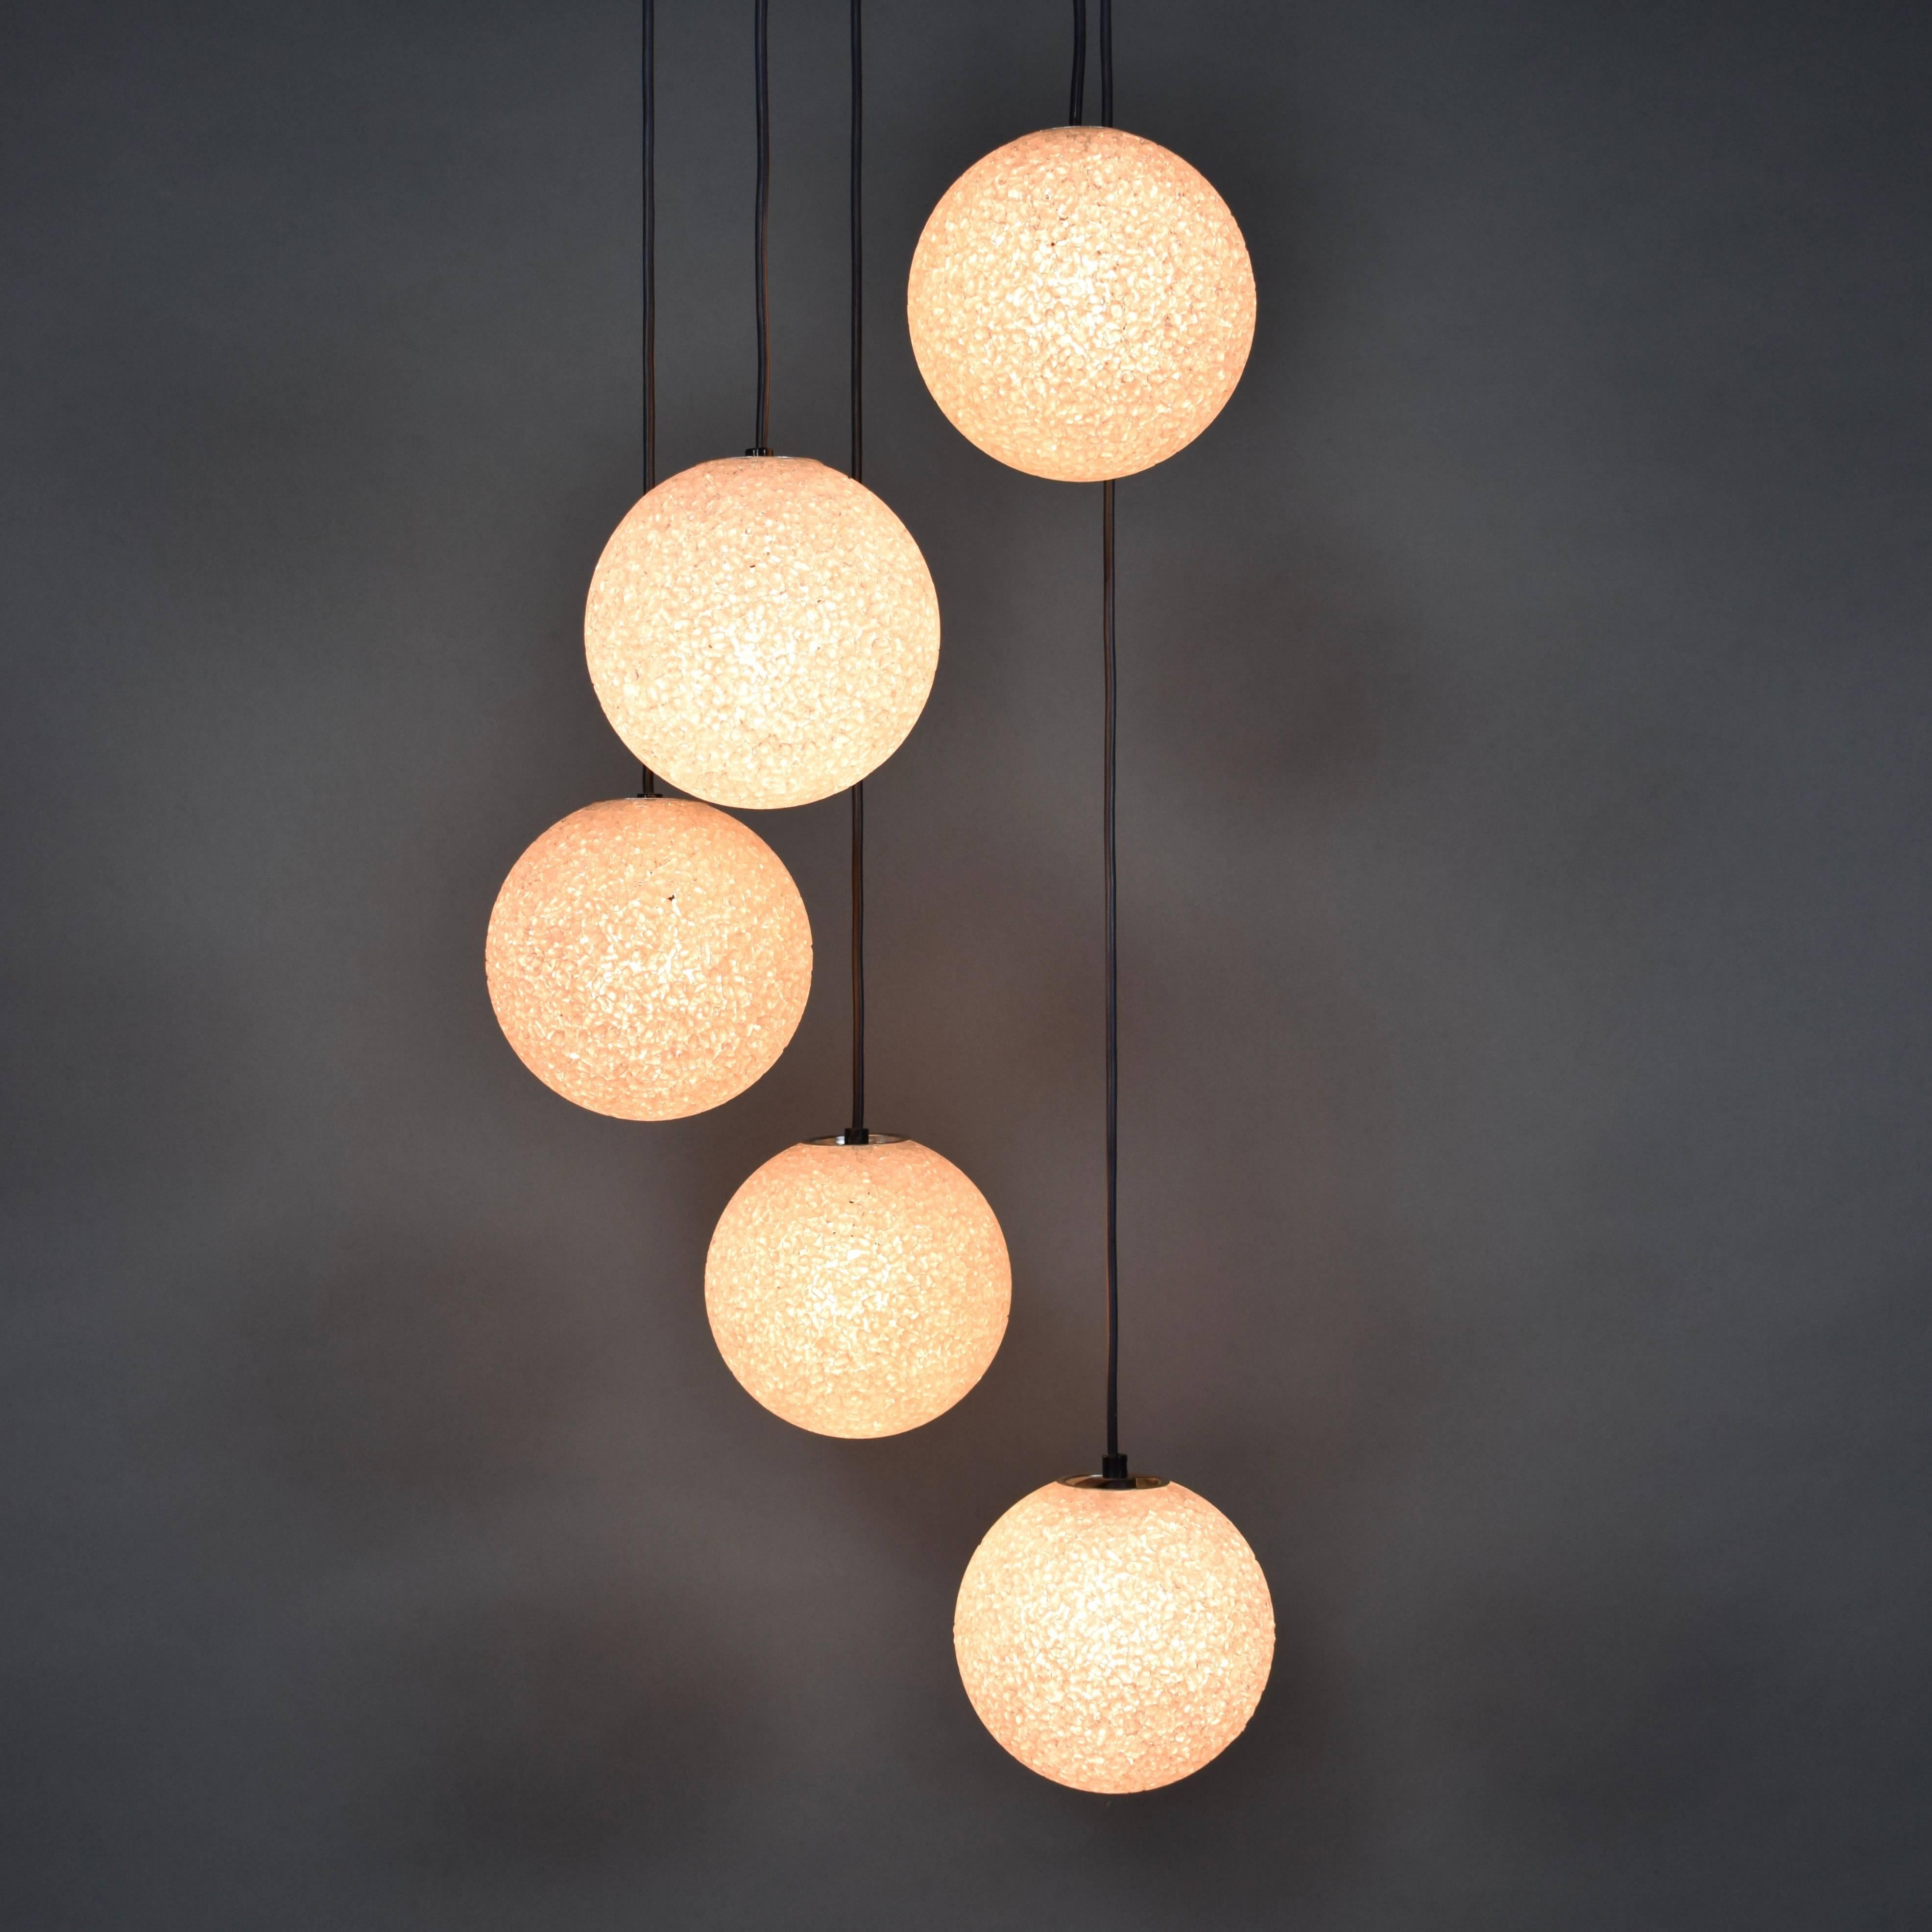 Stunning five-globe chandelier, 1960s. The globes are made of organic shaped pieces of plexiglass and give an amazing star-like light effect.

Designer: Unknown

Manufacturer: Unknown (maybe RAAK Amsterdam)

Country: Netherlands

Model: